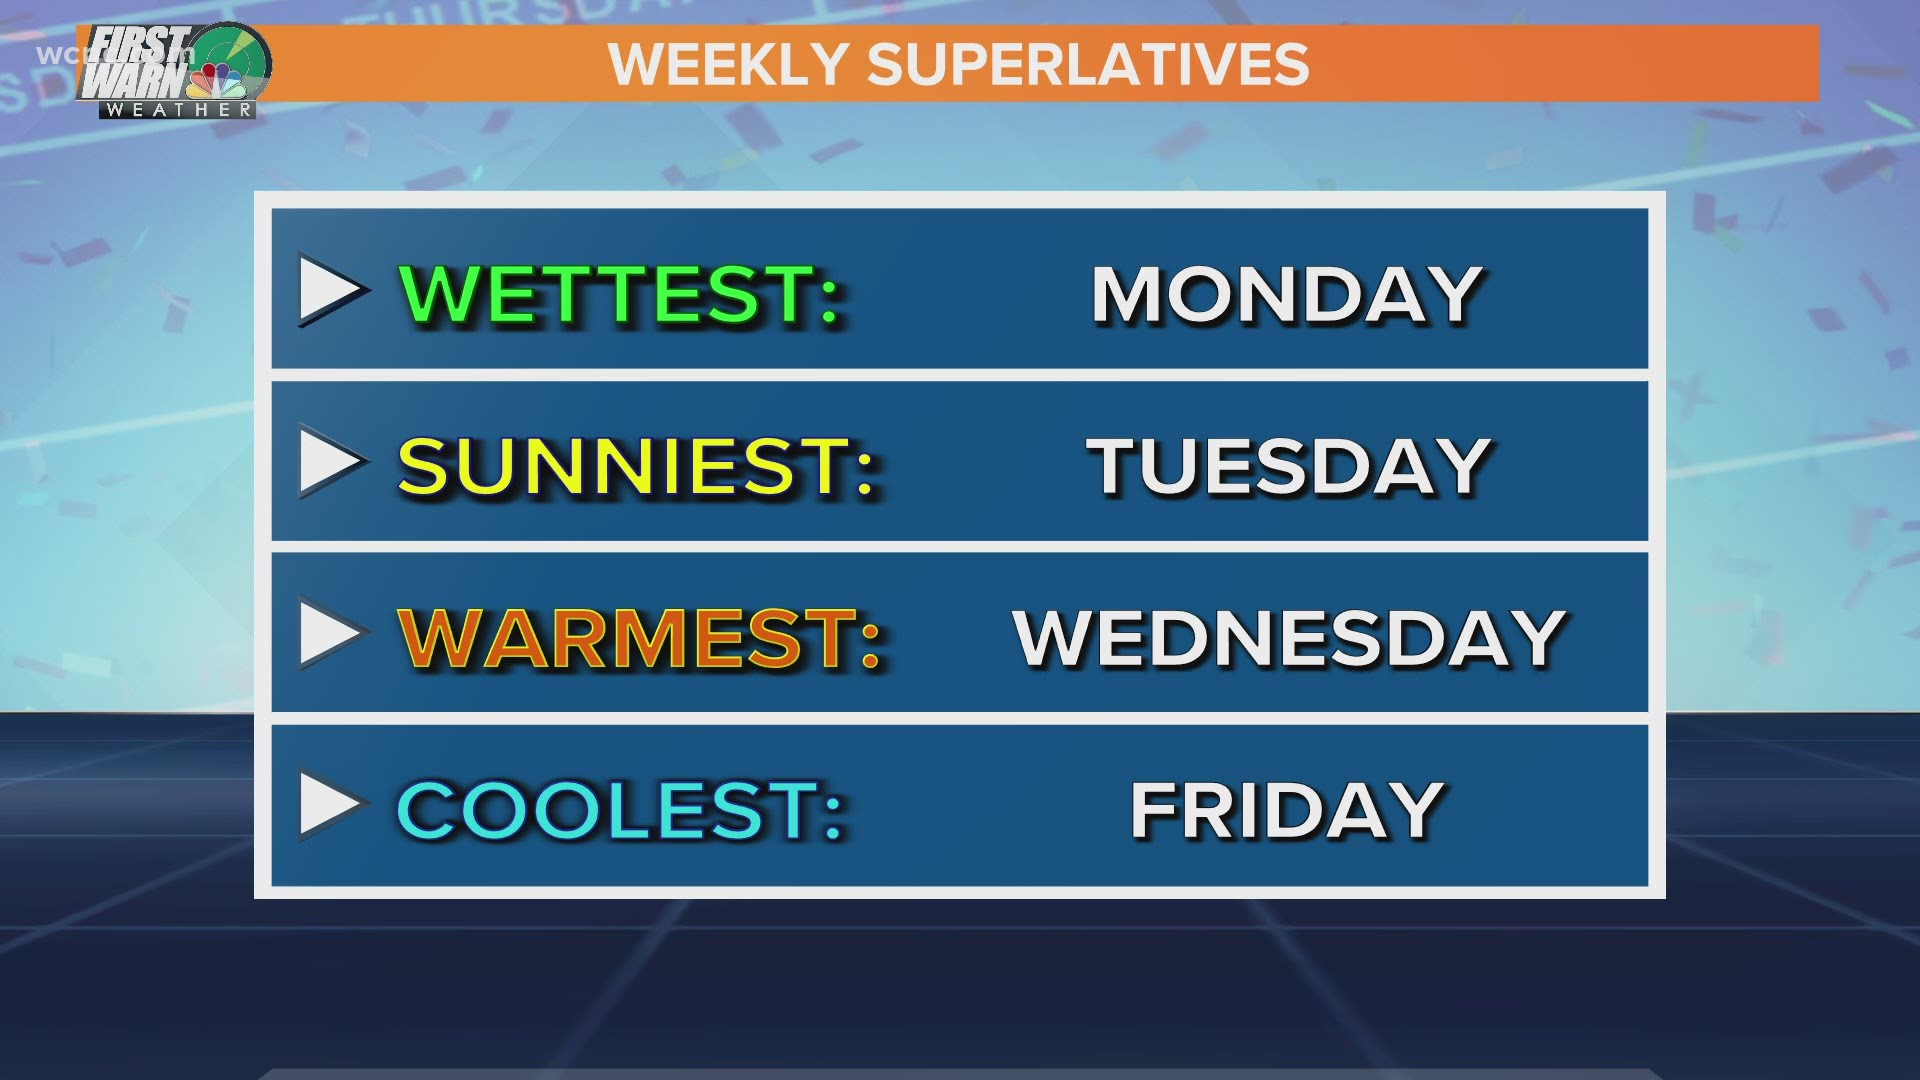 What day will be the wettest, warmest, coolest and sunniest on the 7-day forecast. And what day is the best!?